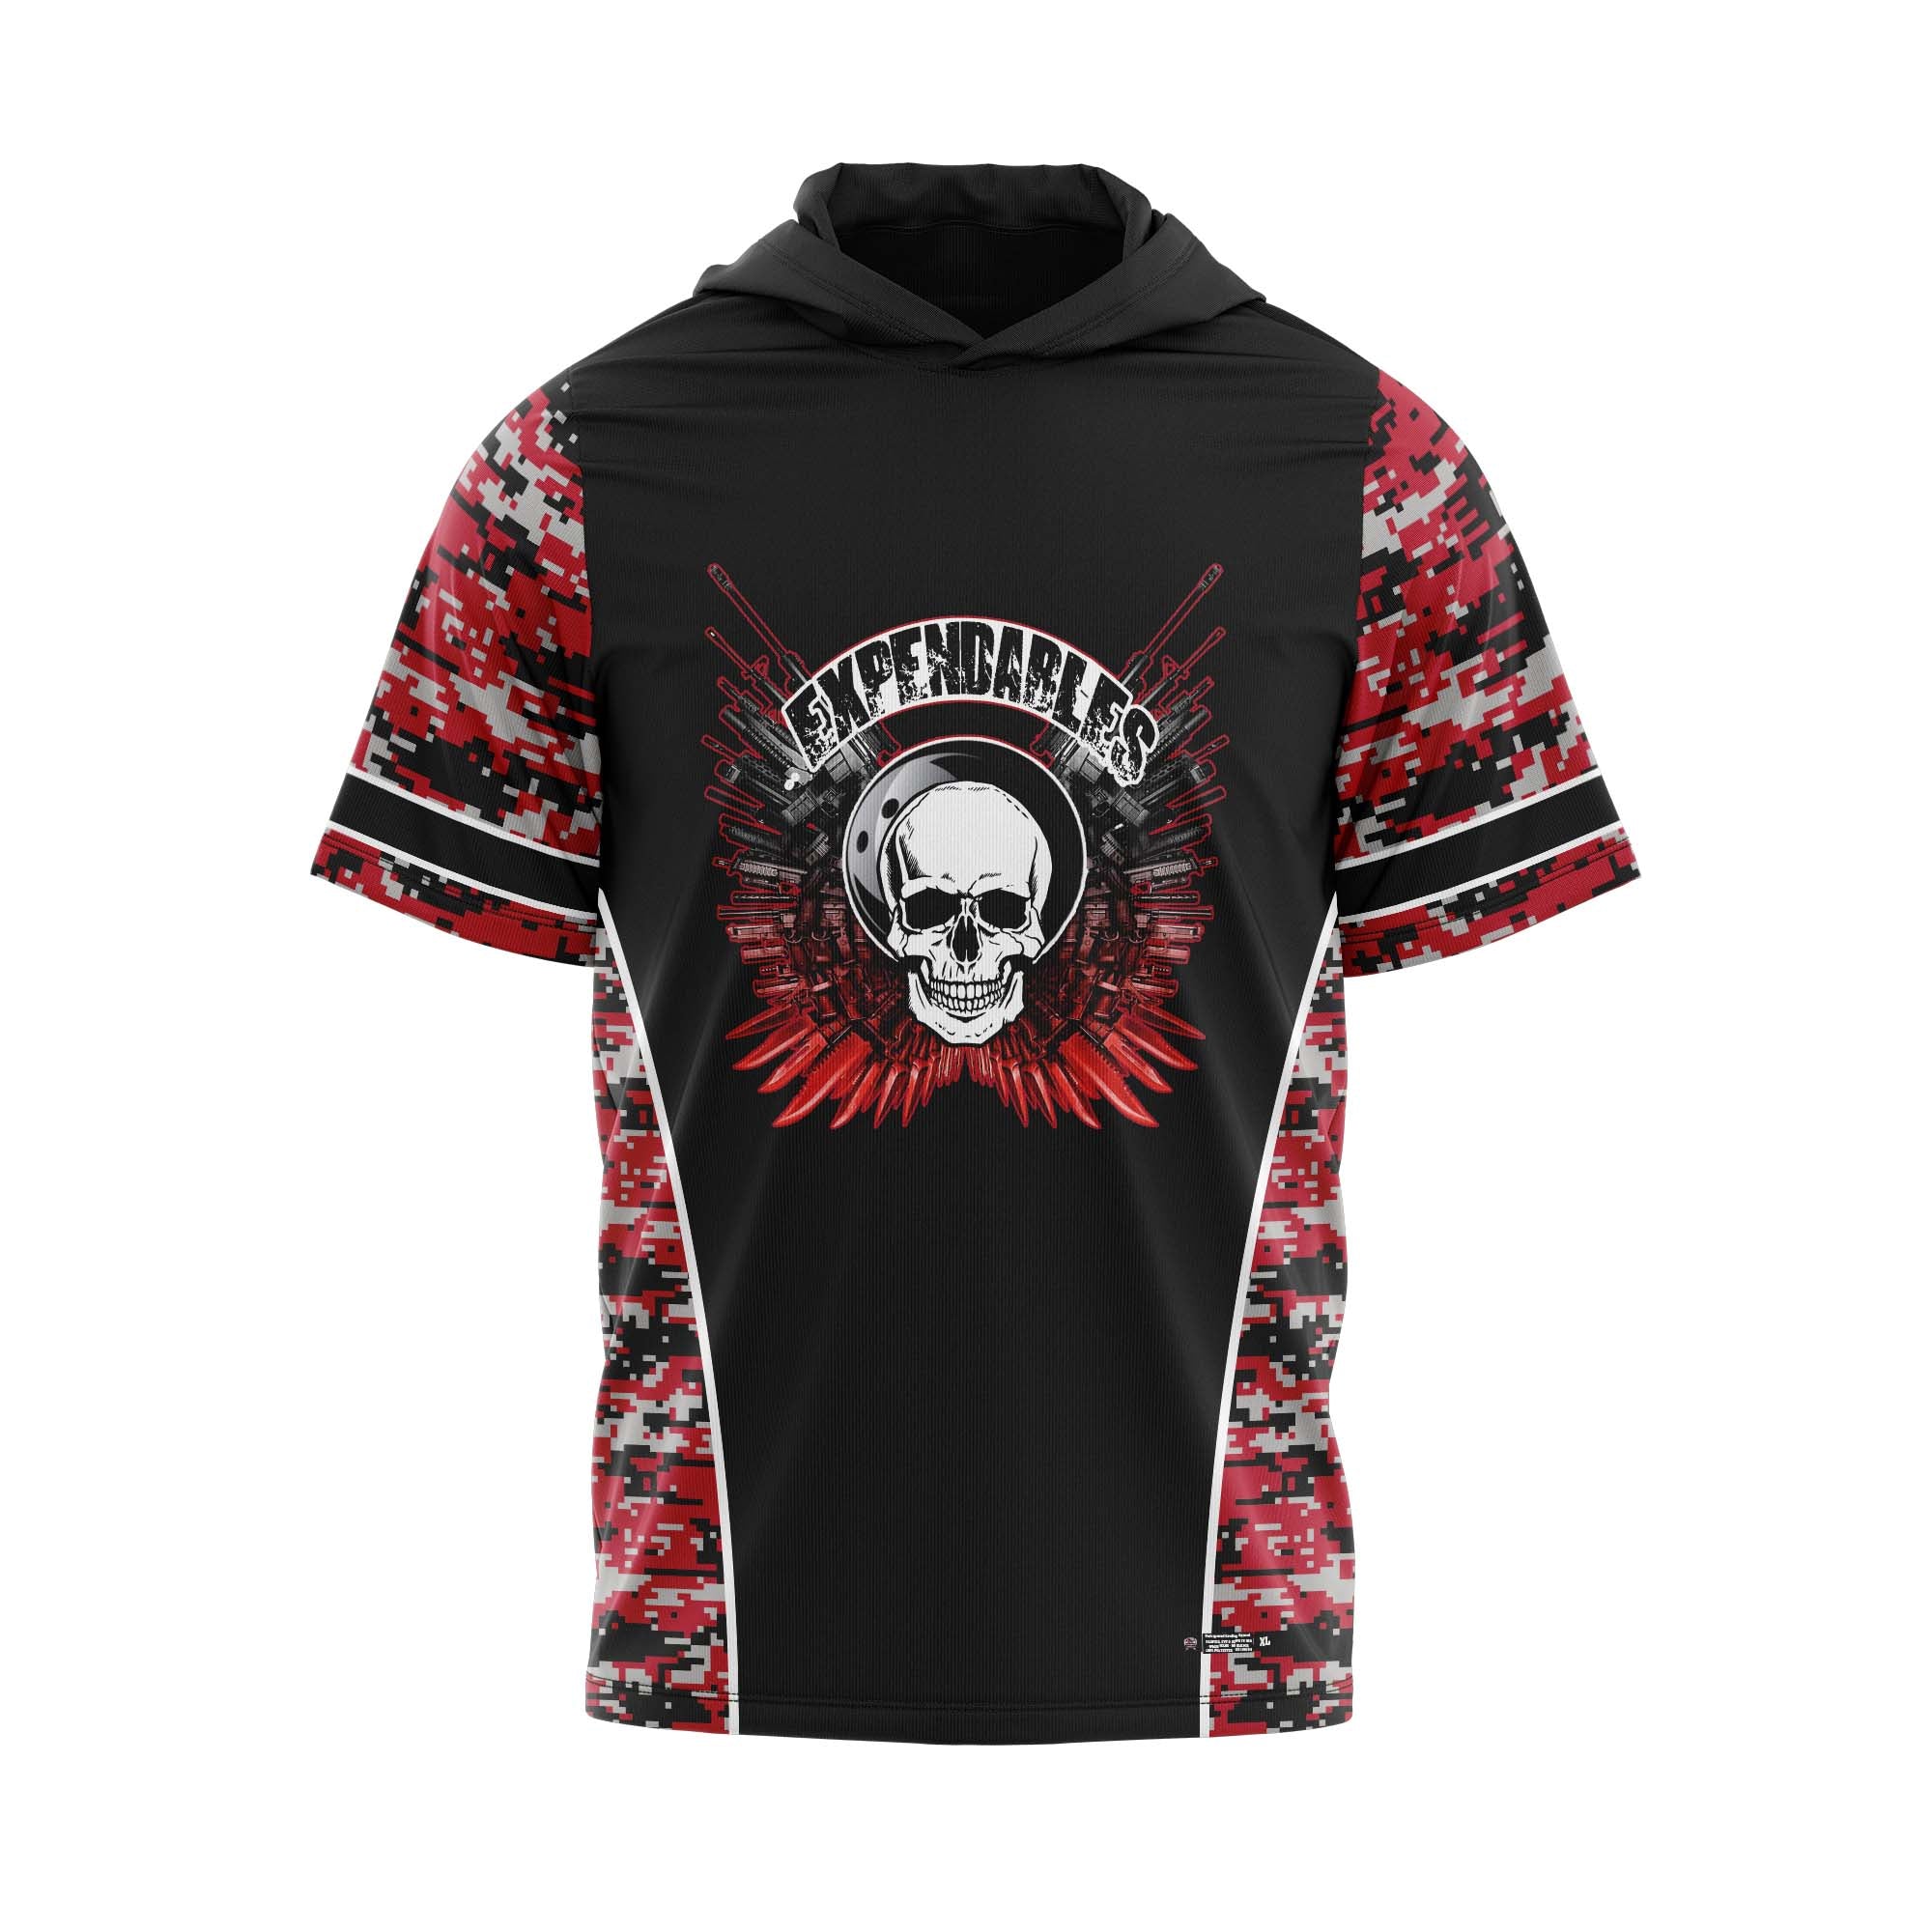 The Expendables Splatter Camo Jersey